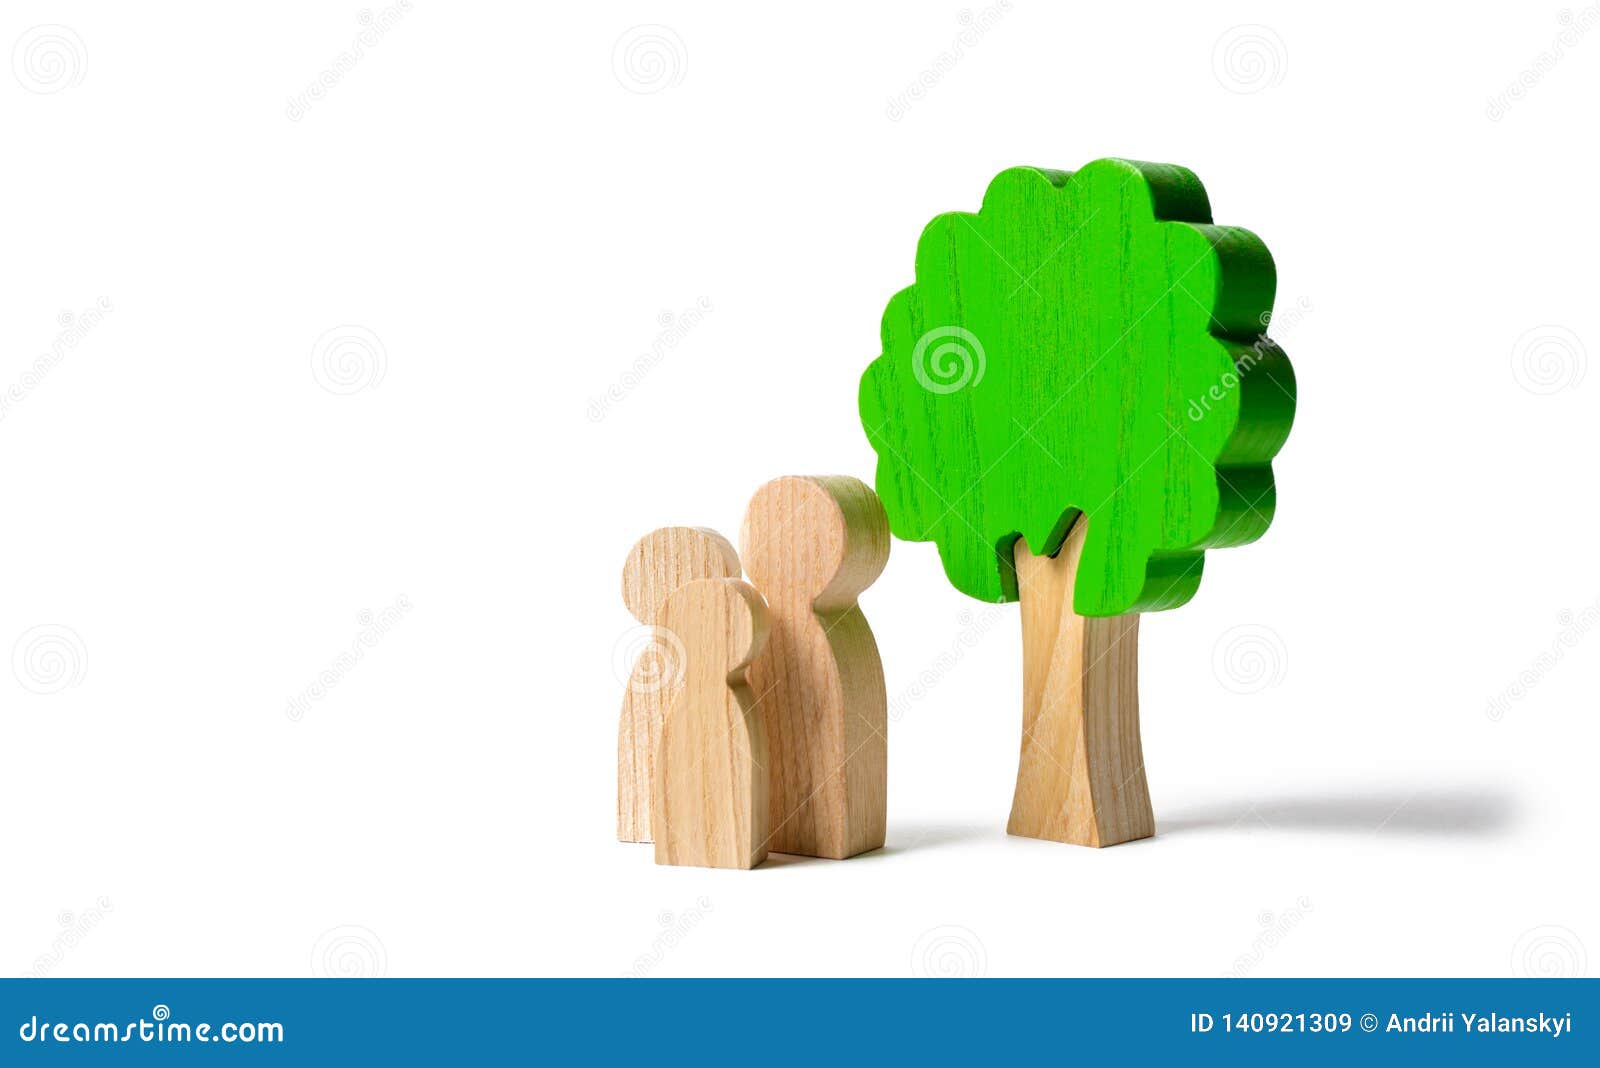 family figures are standing near the tree on an  background. pastime with family, kinship and parenting. instilling good